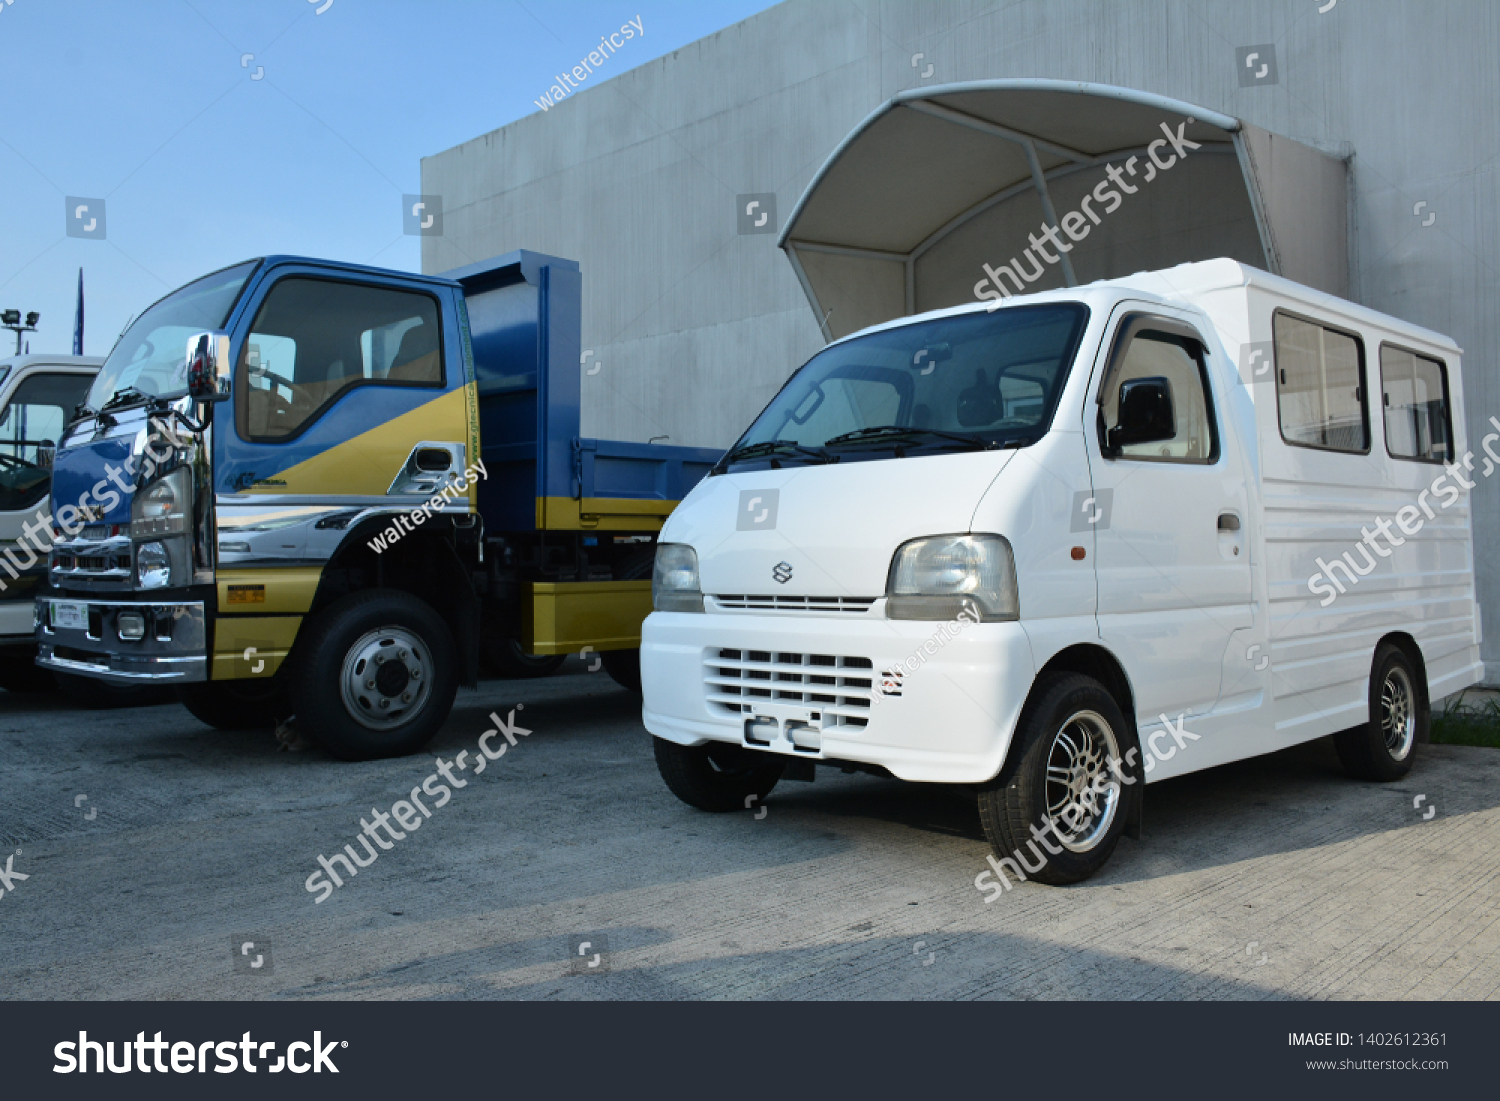 PASIG, PH - MAY 18: Suzuki multi cab at First U-Trip Rebuilt Truck Show on May 18, 2019 in Pasig, Philippines. #1402612361